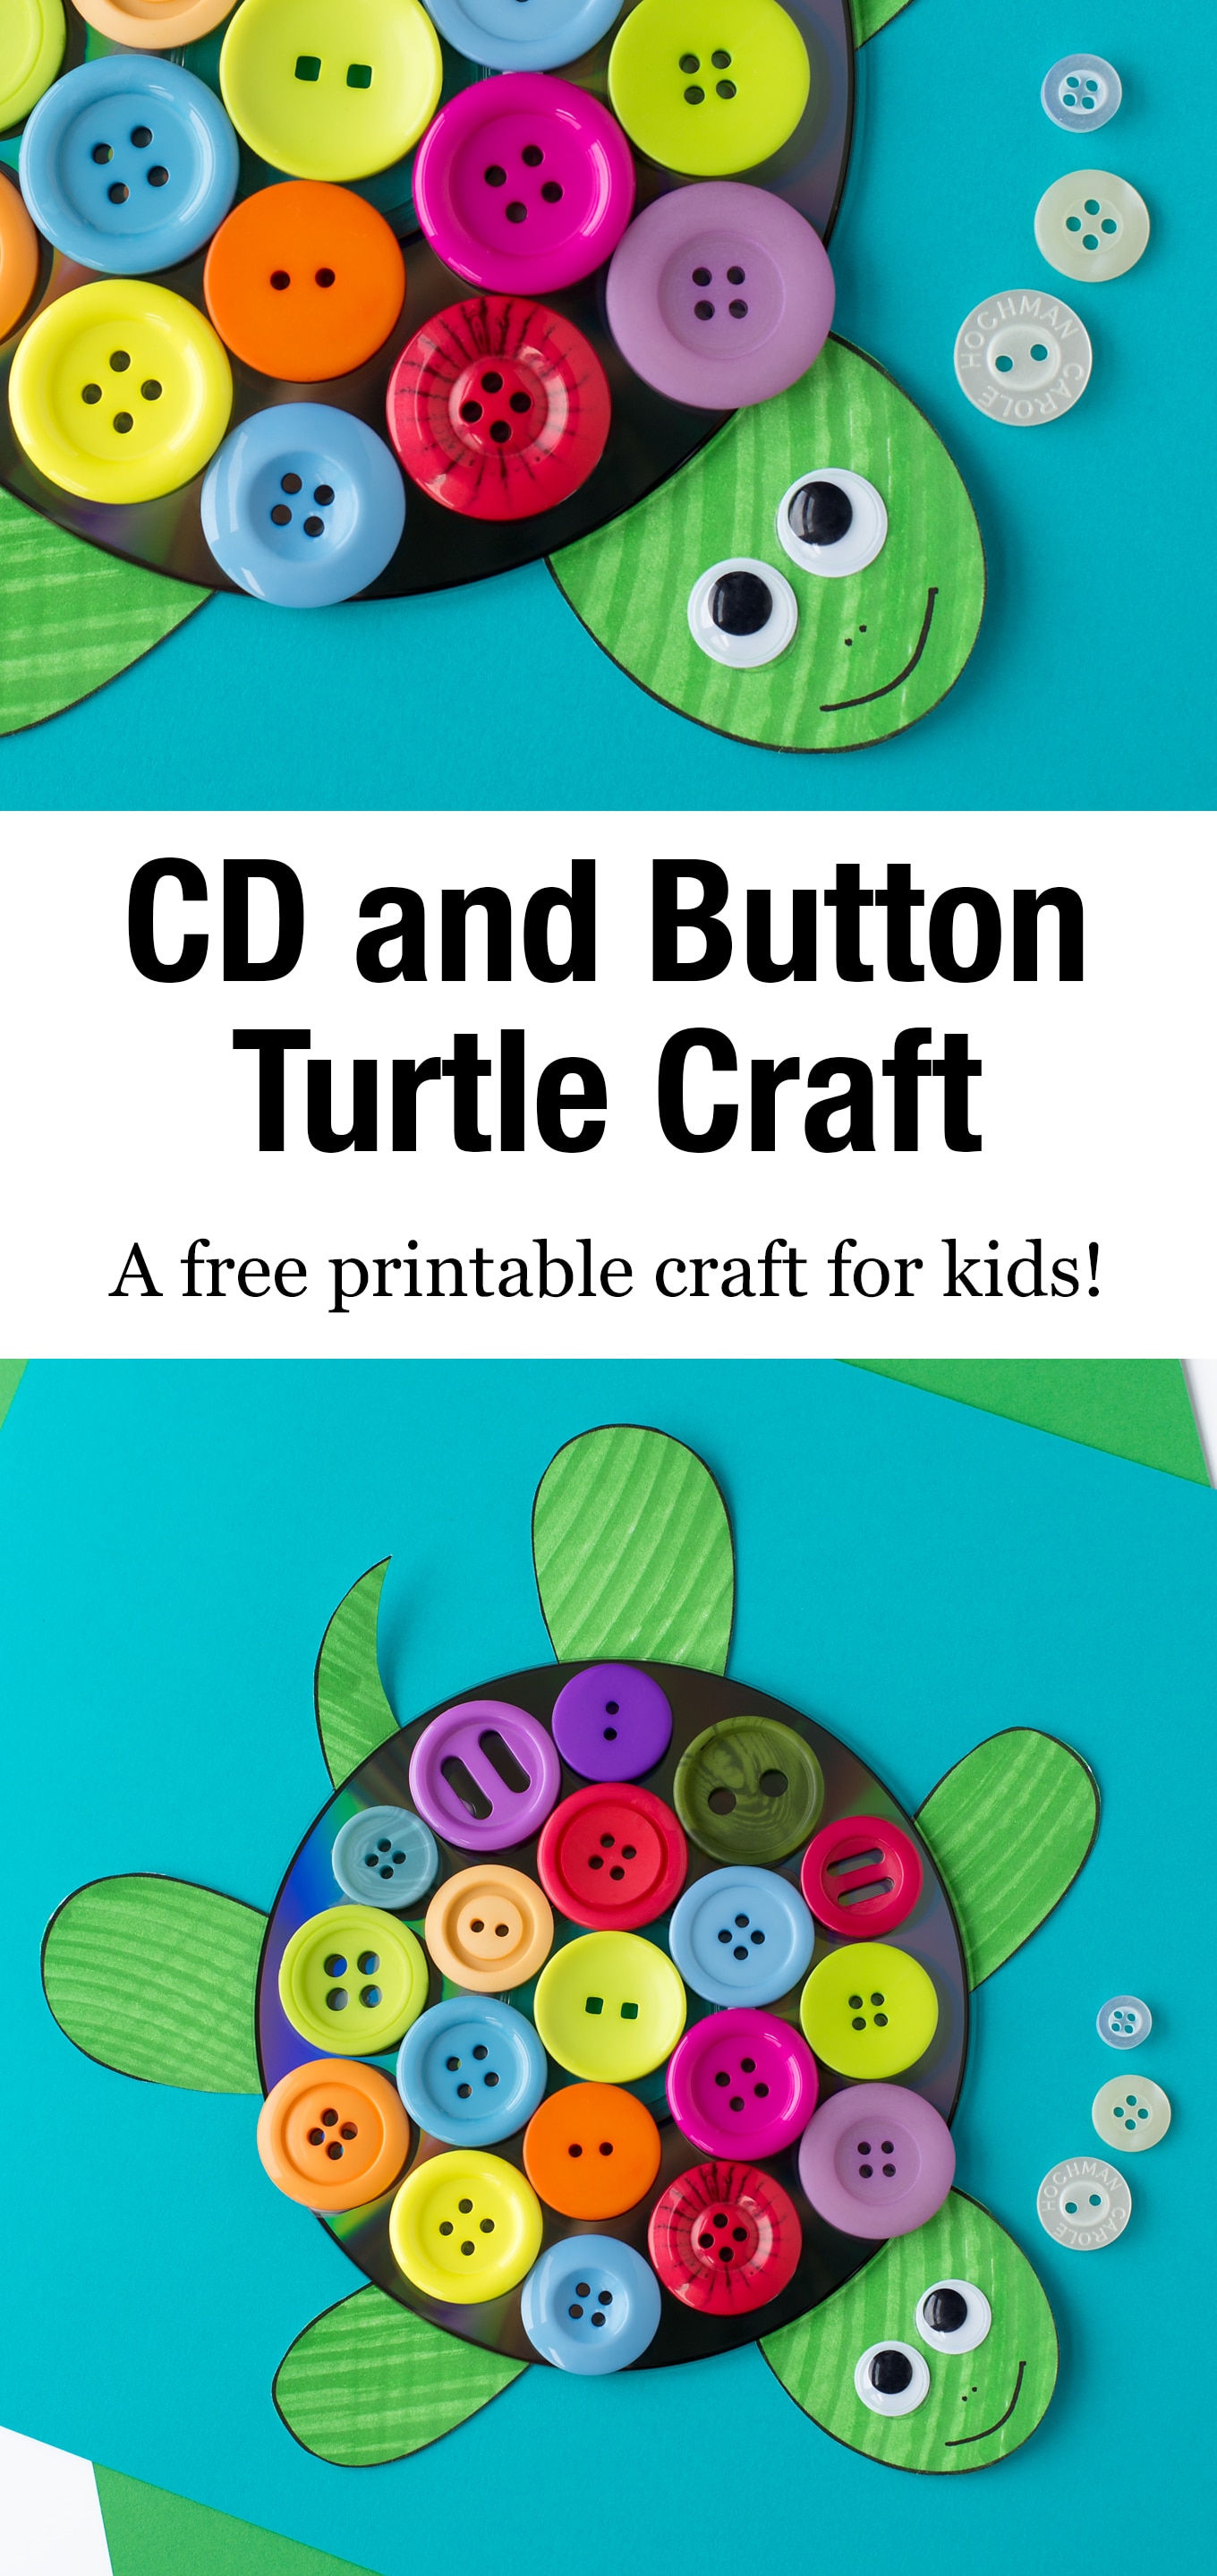 This easy and fun CD & Button Turtle Craft for kids includes a free printable turtle template, making it perfect for home or school. #turtle #craft via @firefliesandmudpies